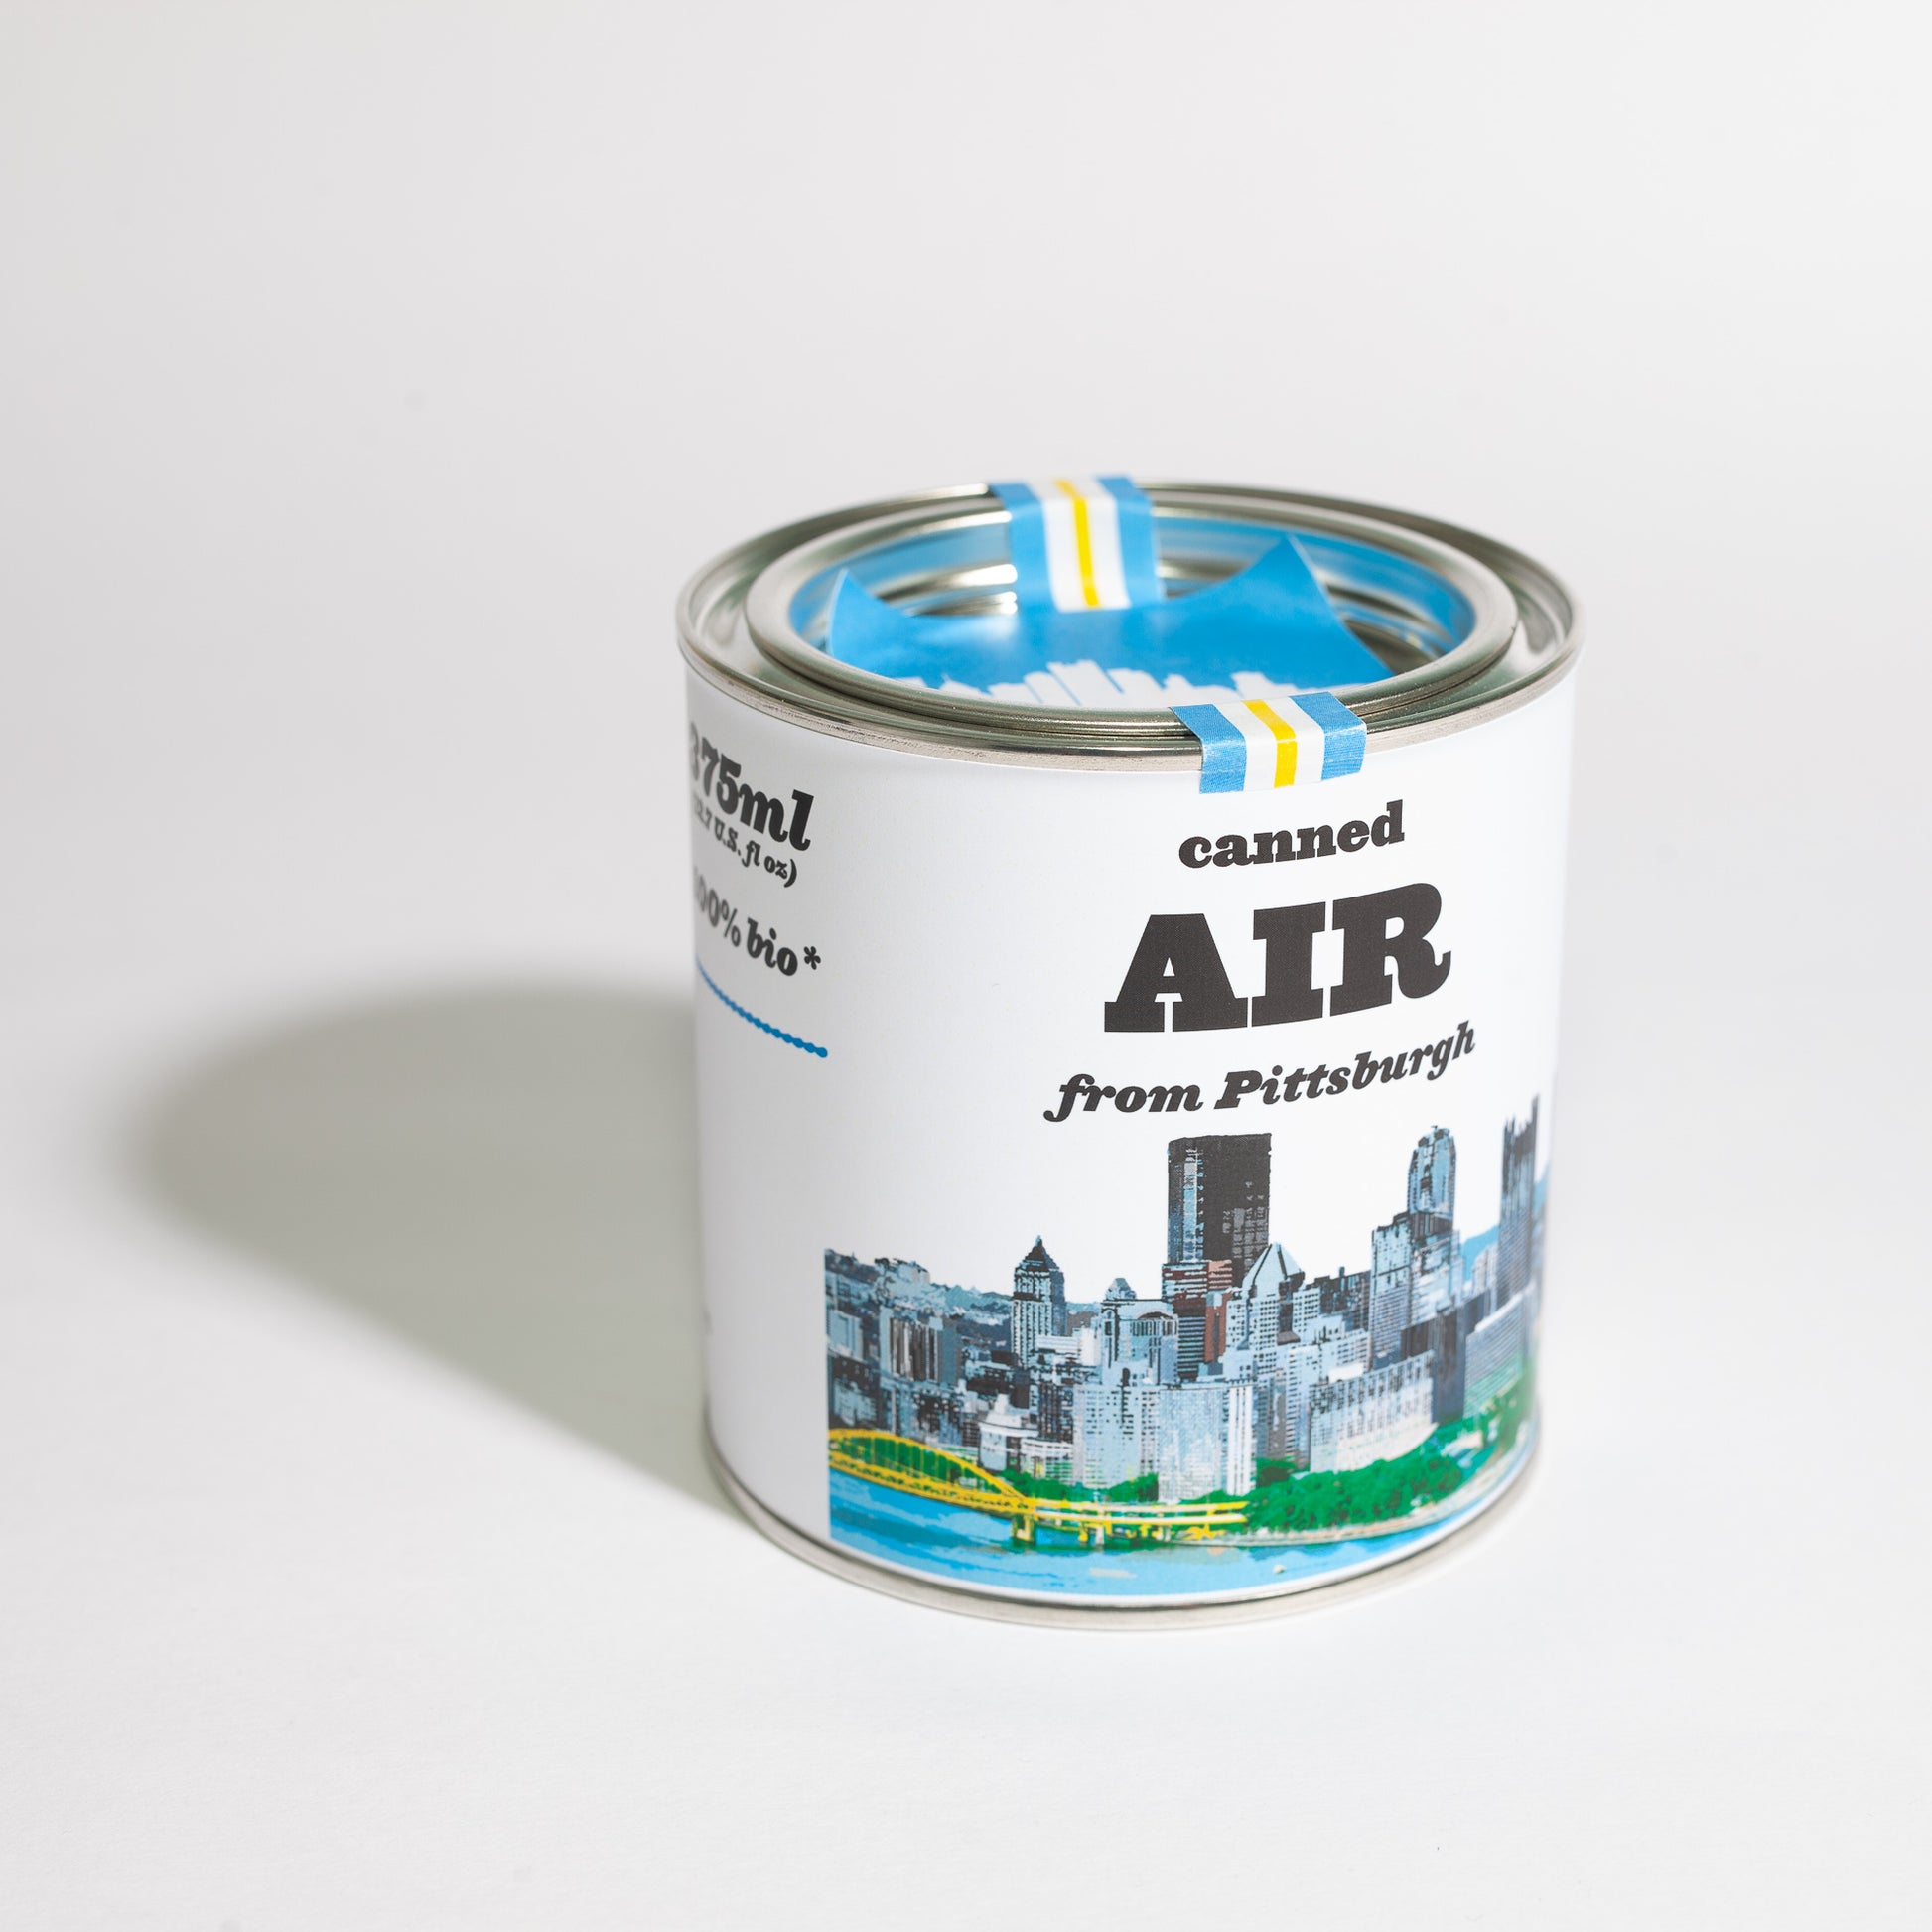 Canned Air from Pittsburgh